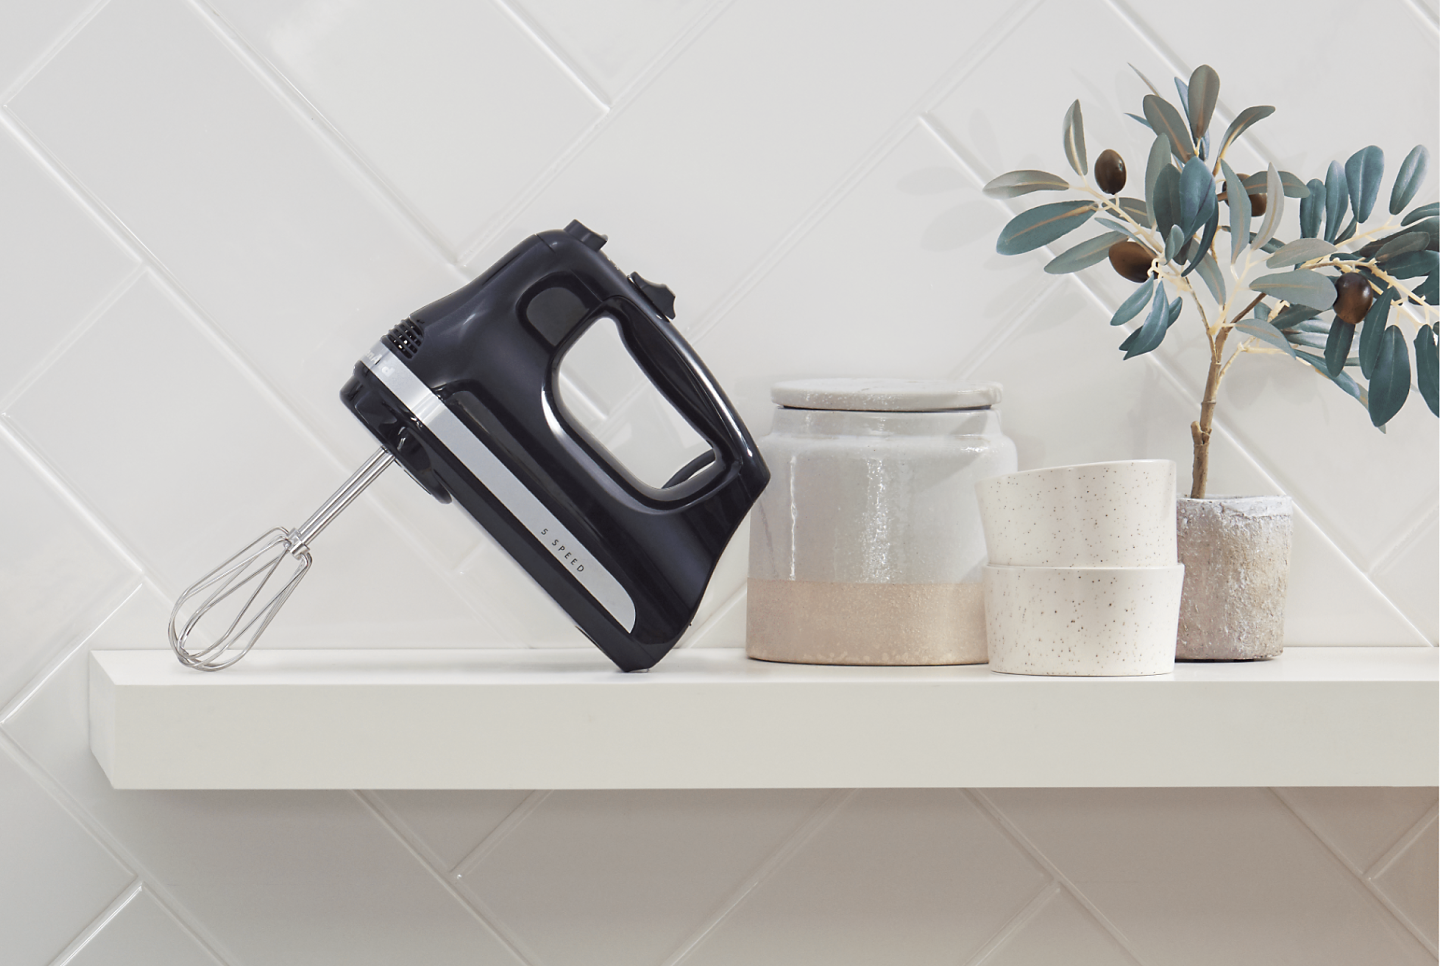  Black hand mixer next to ingredients and bowls on countertop